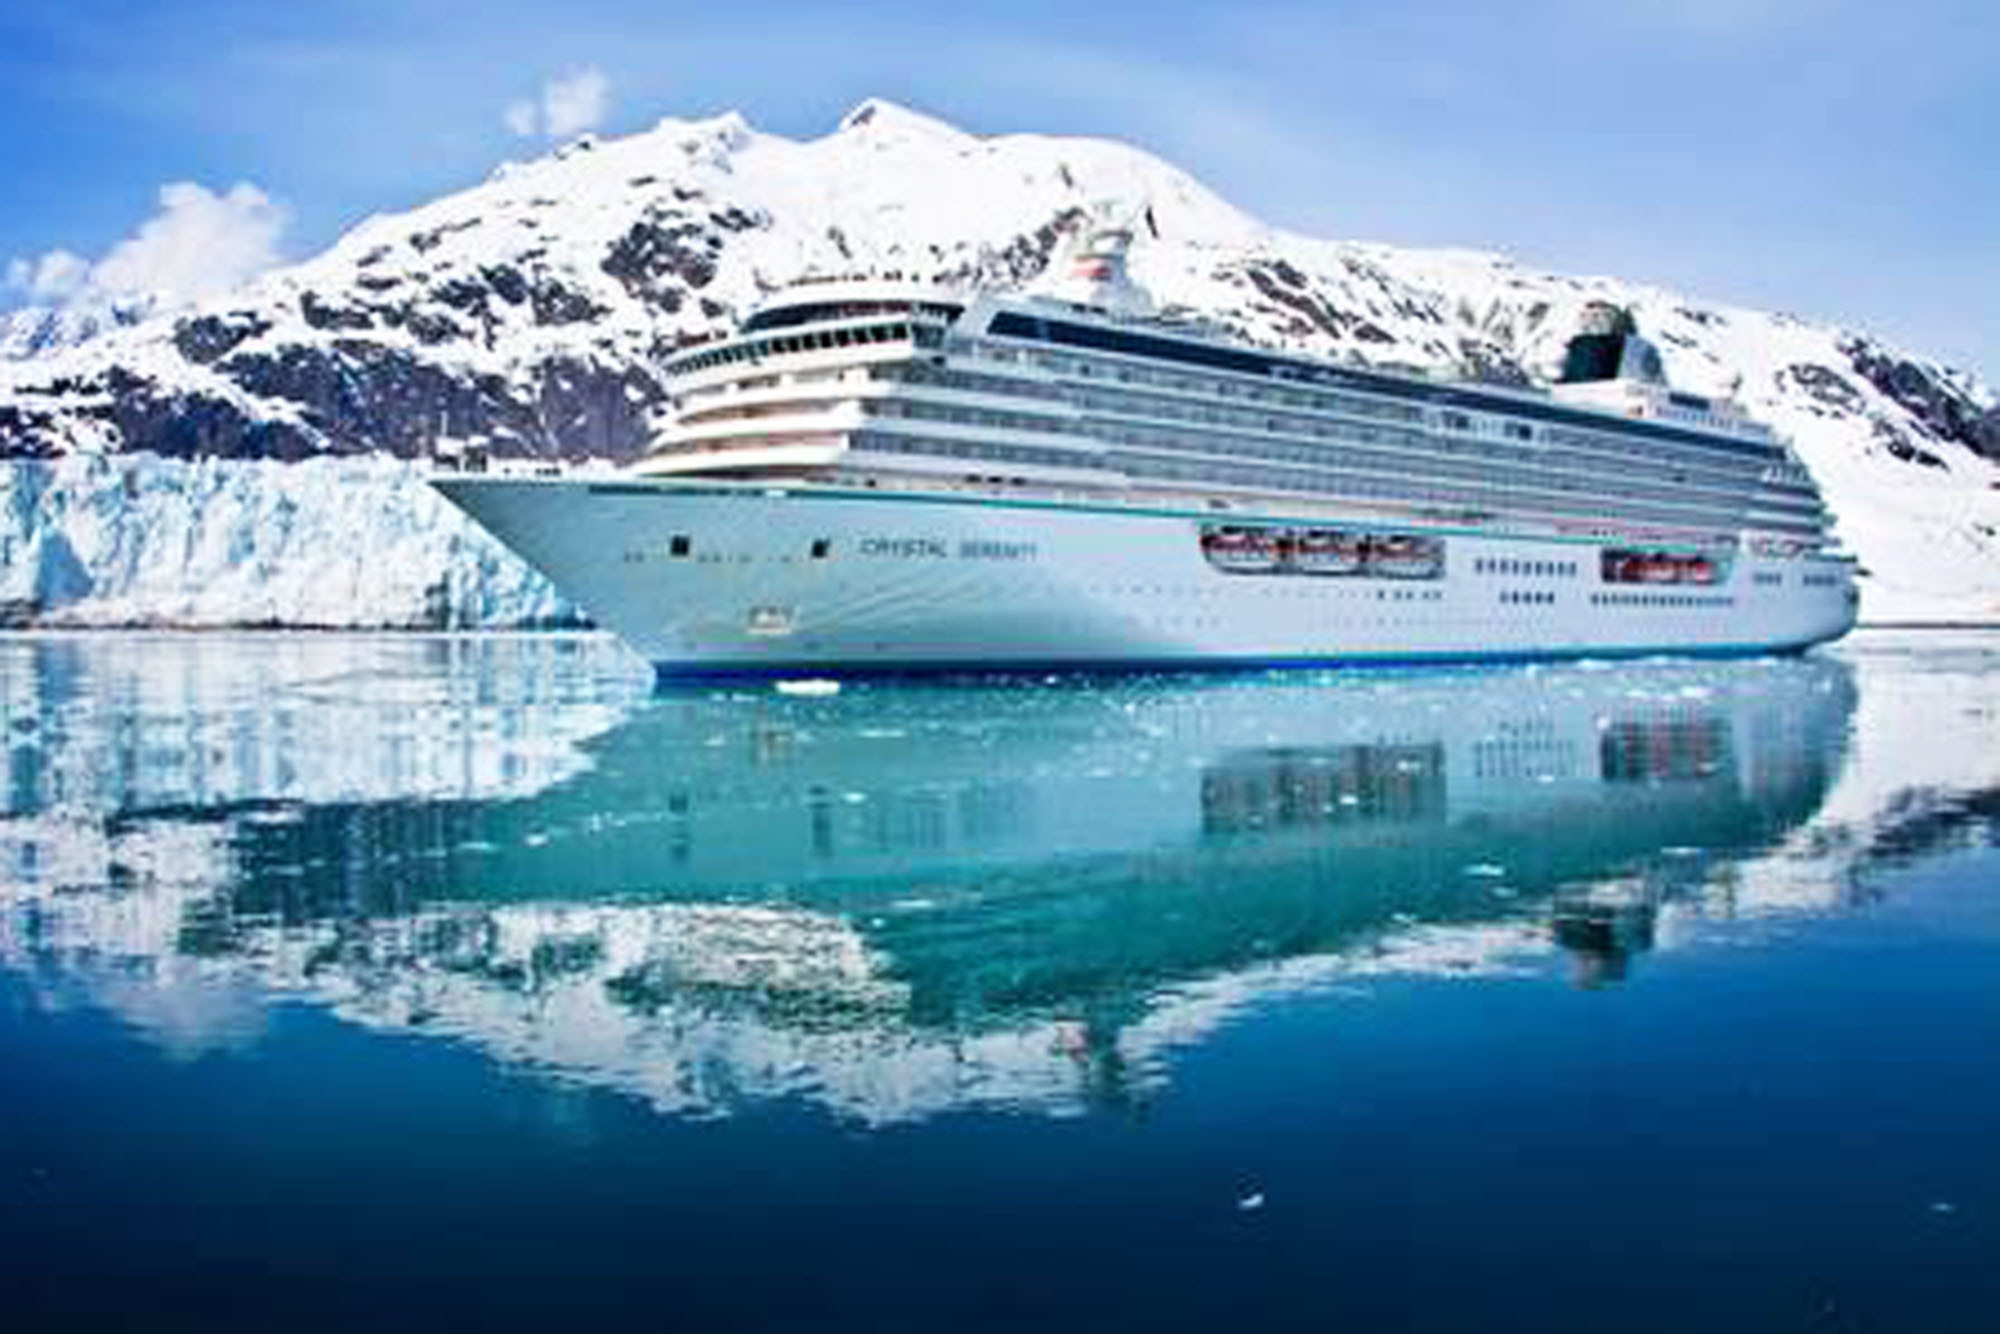 The 6 most lavish cruise ships on the high seas